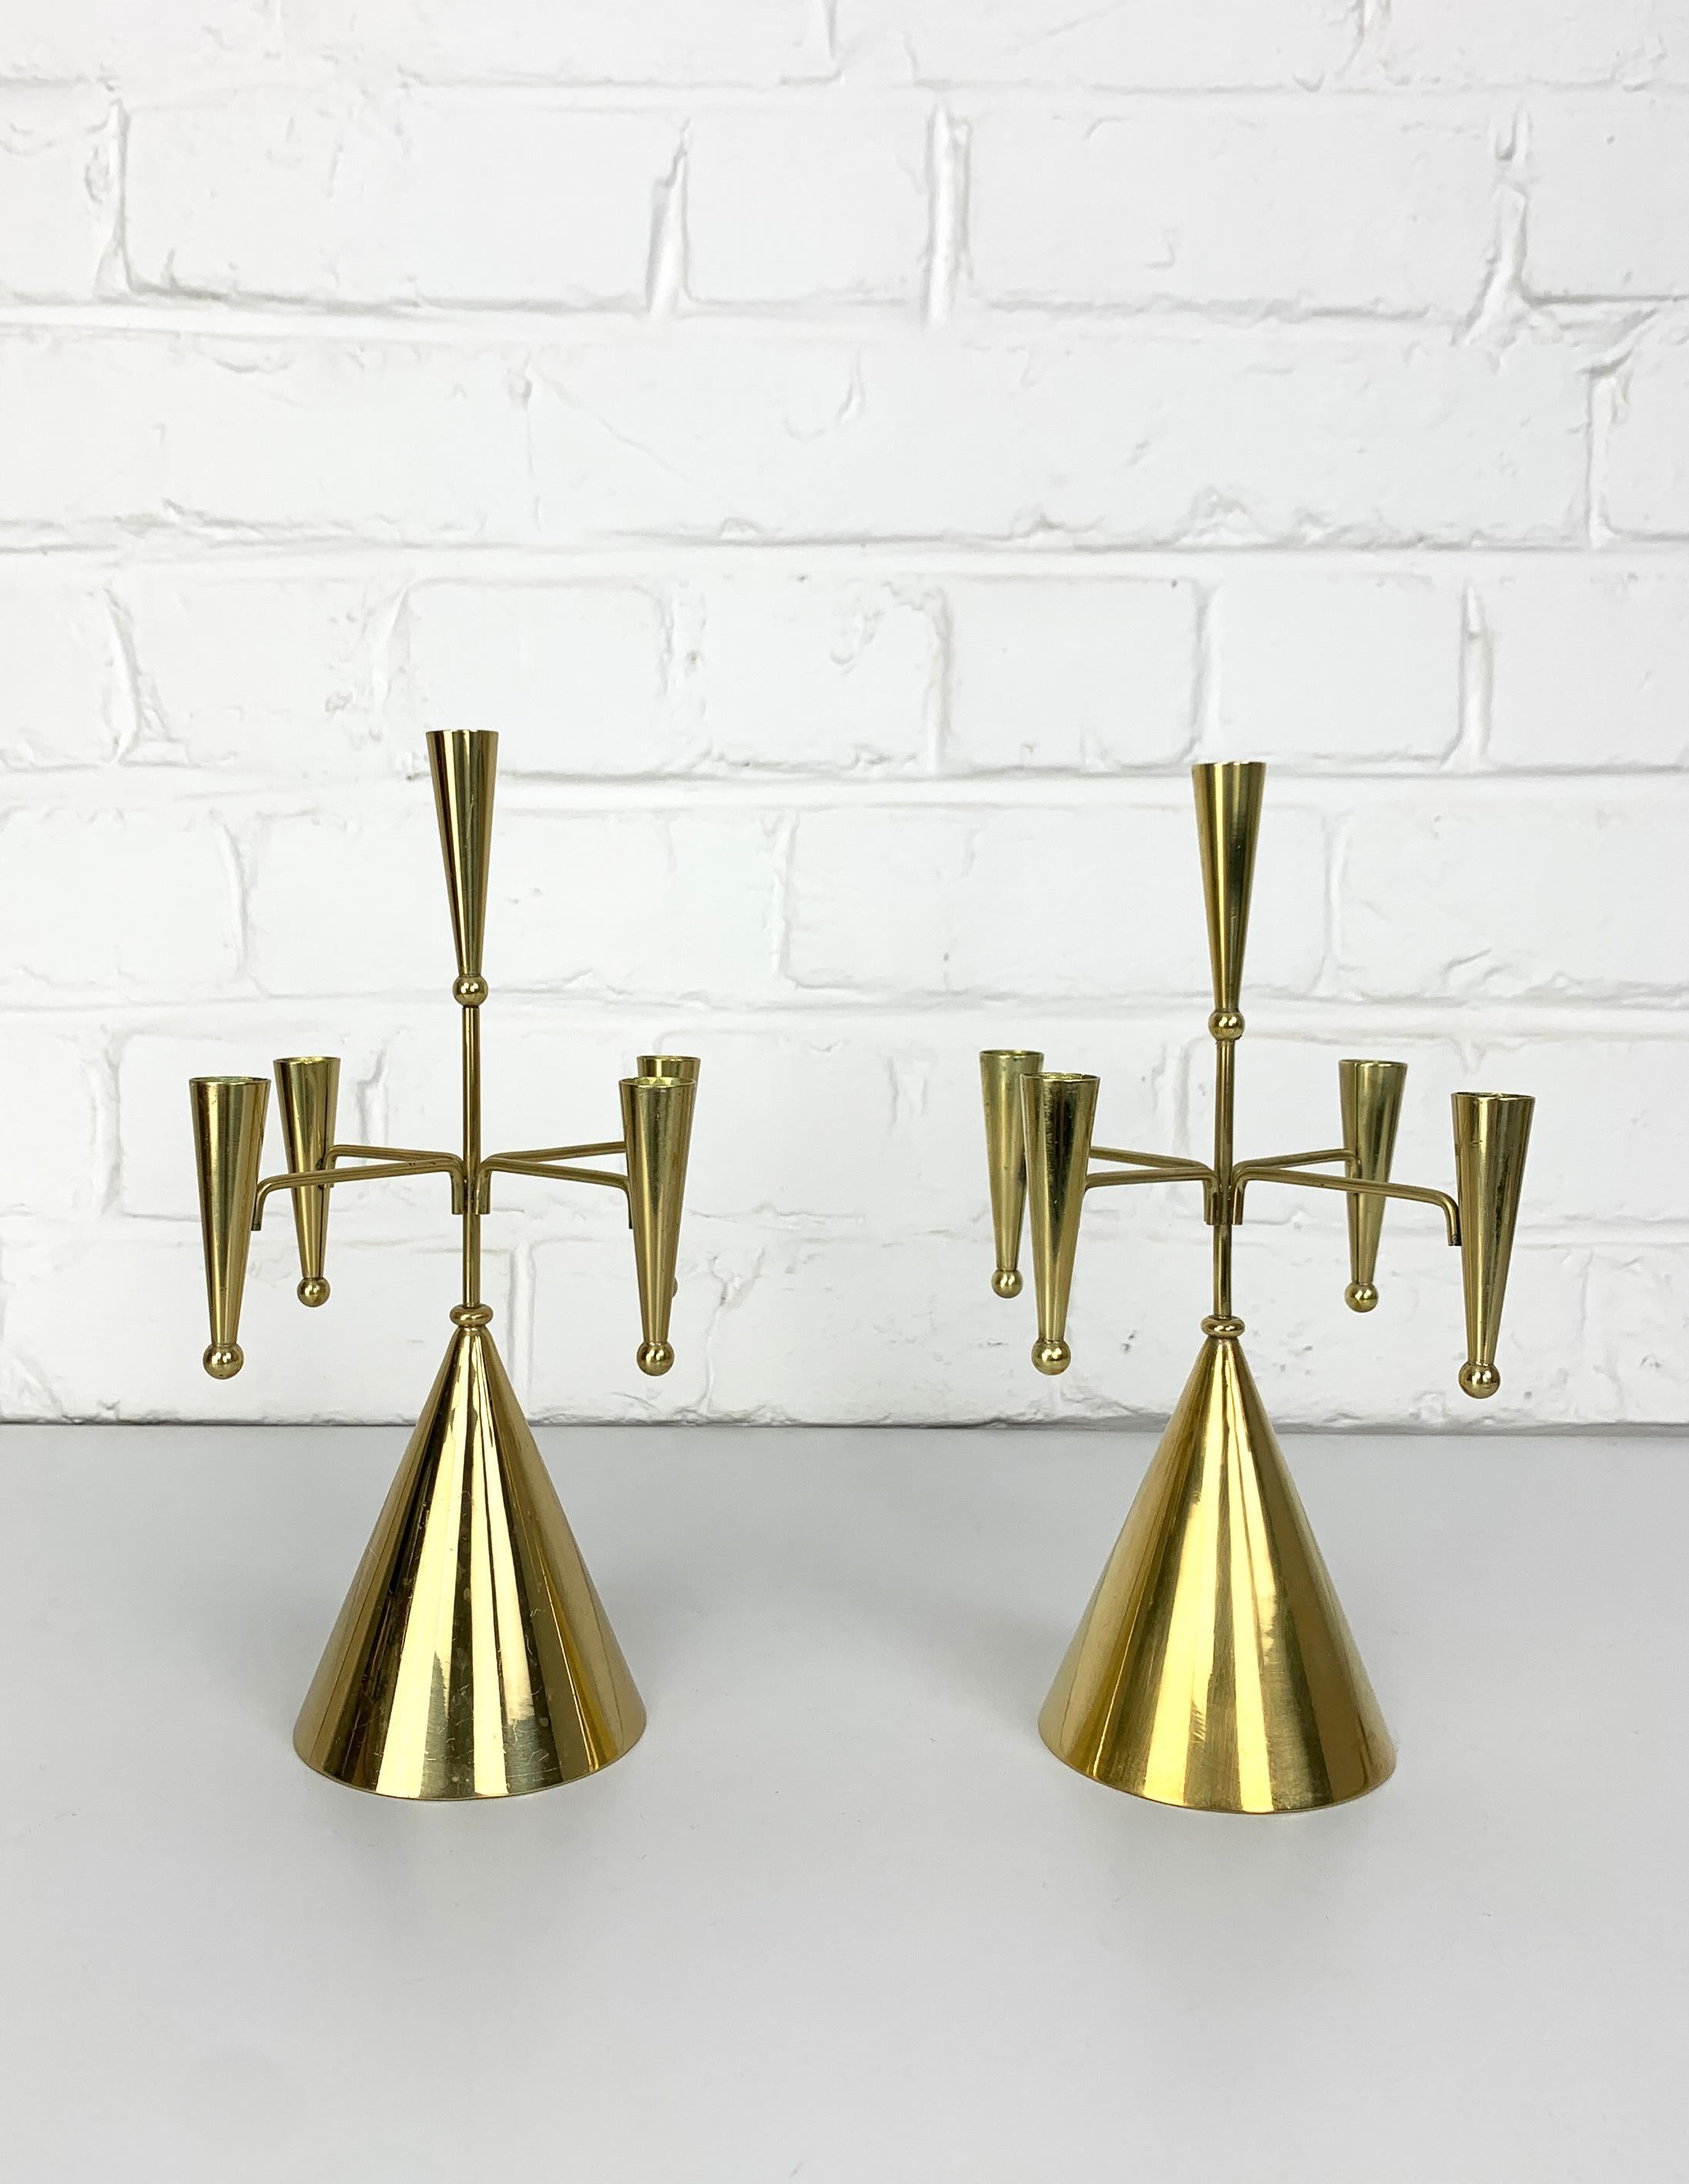 Pair of Swedish Modernist candle holders for 5 candles was designed by Gunnar Ander. Produced by Ystad-Metall, located in the town of Ystad in Sweden. 

Entirely made of brass, this playful design is based on cones and spheres assembled by brass